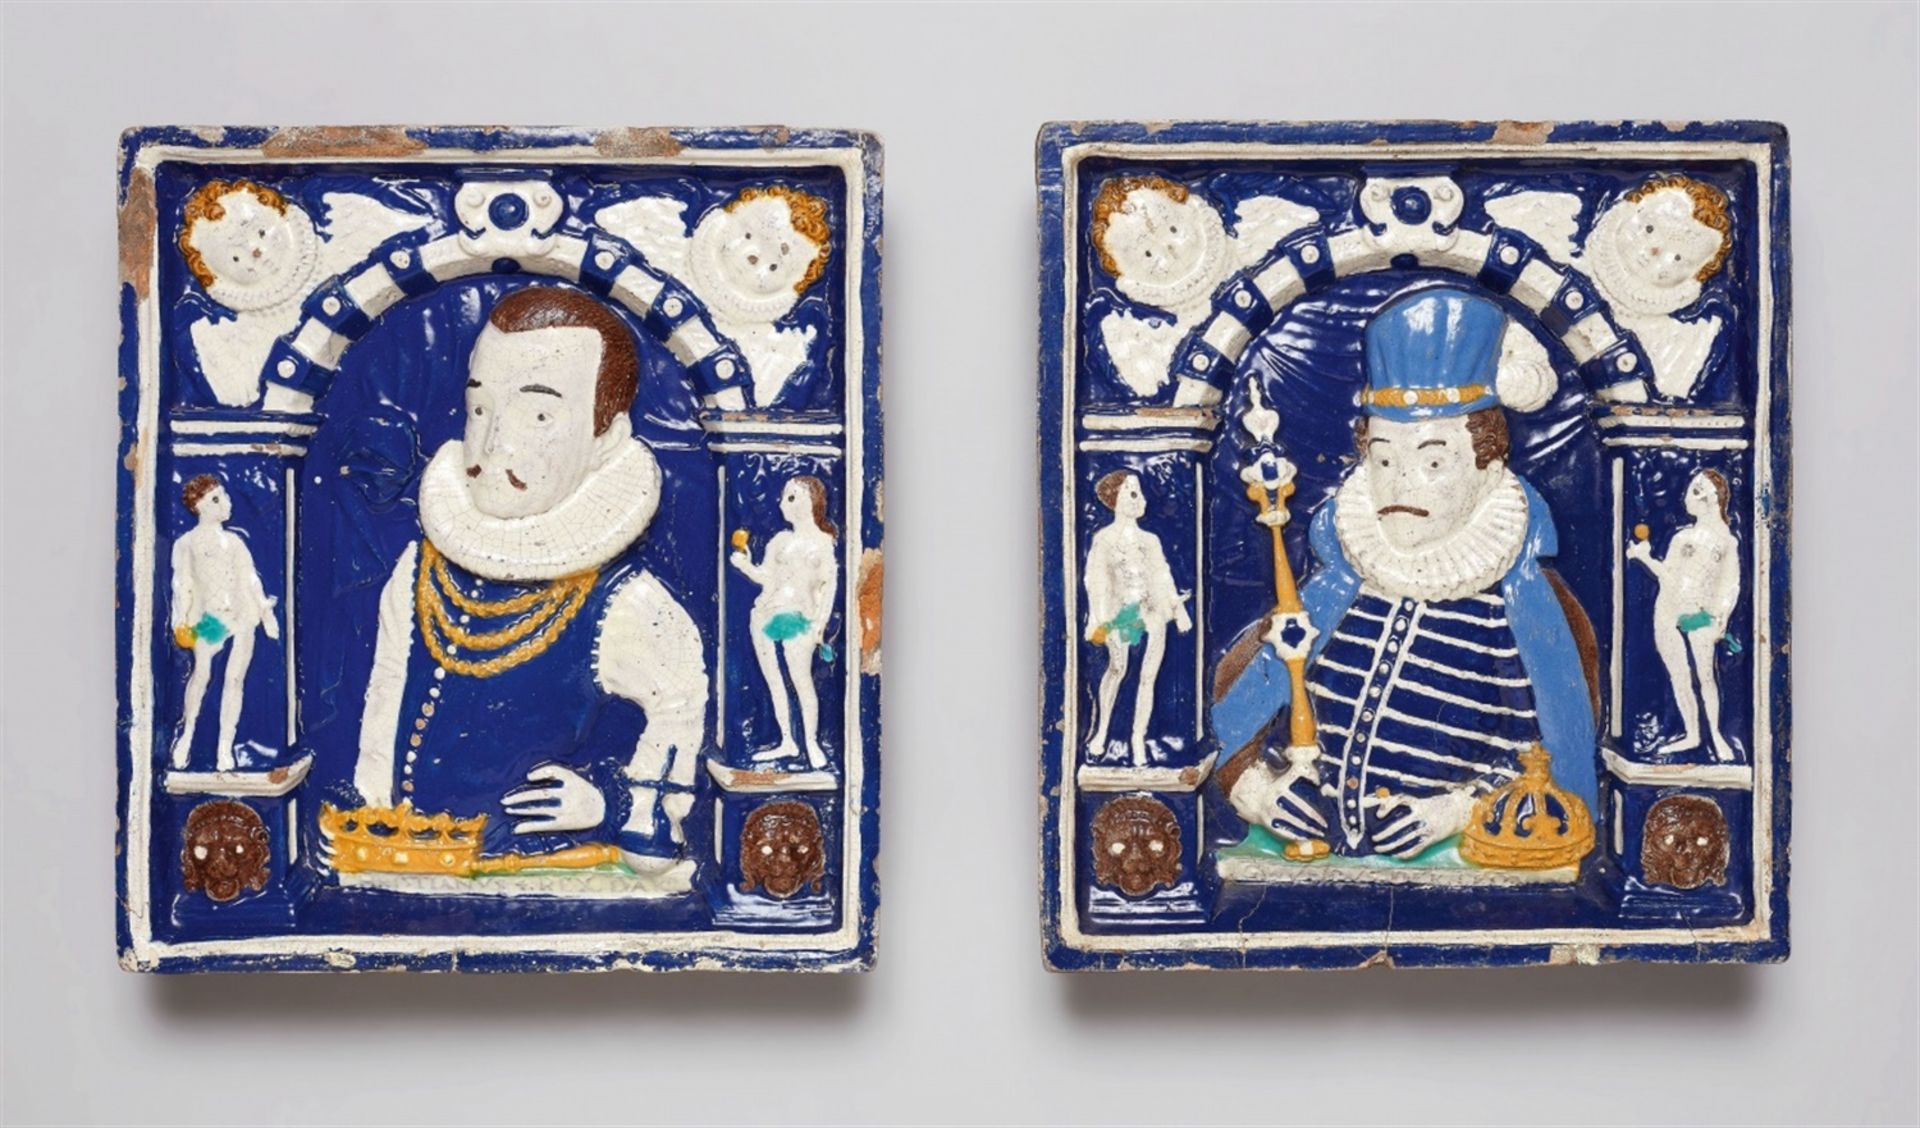 A pair of ceramic stove tiles with portraits of Emperor Sigismund and King Christian IVTiles